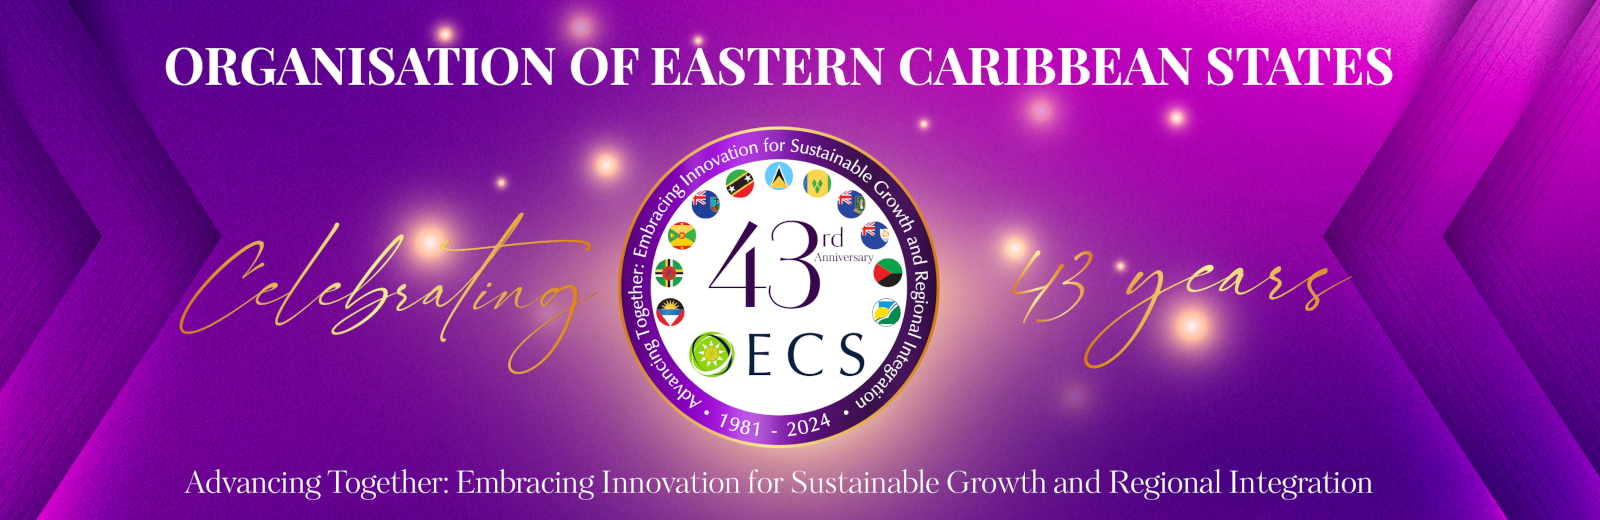 OECS 43rd Anniversary - Advancing Together: Embracing Innovation for Sustainable Growth and Regional Integration